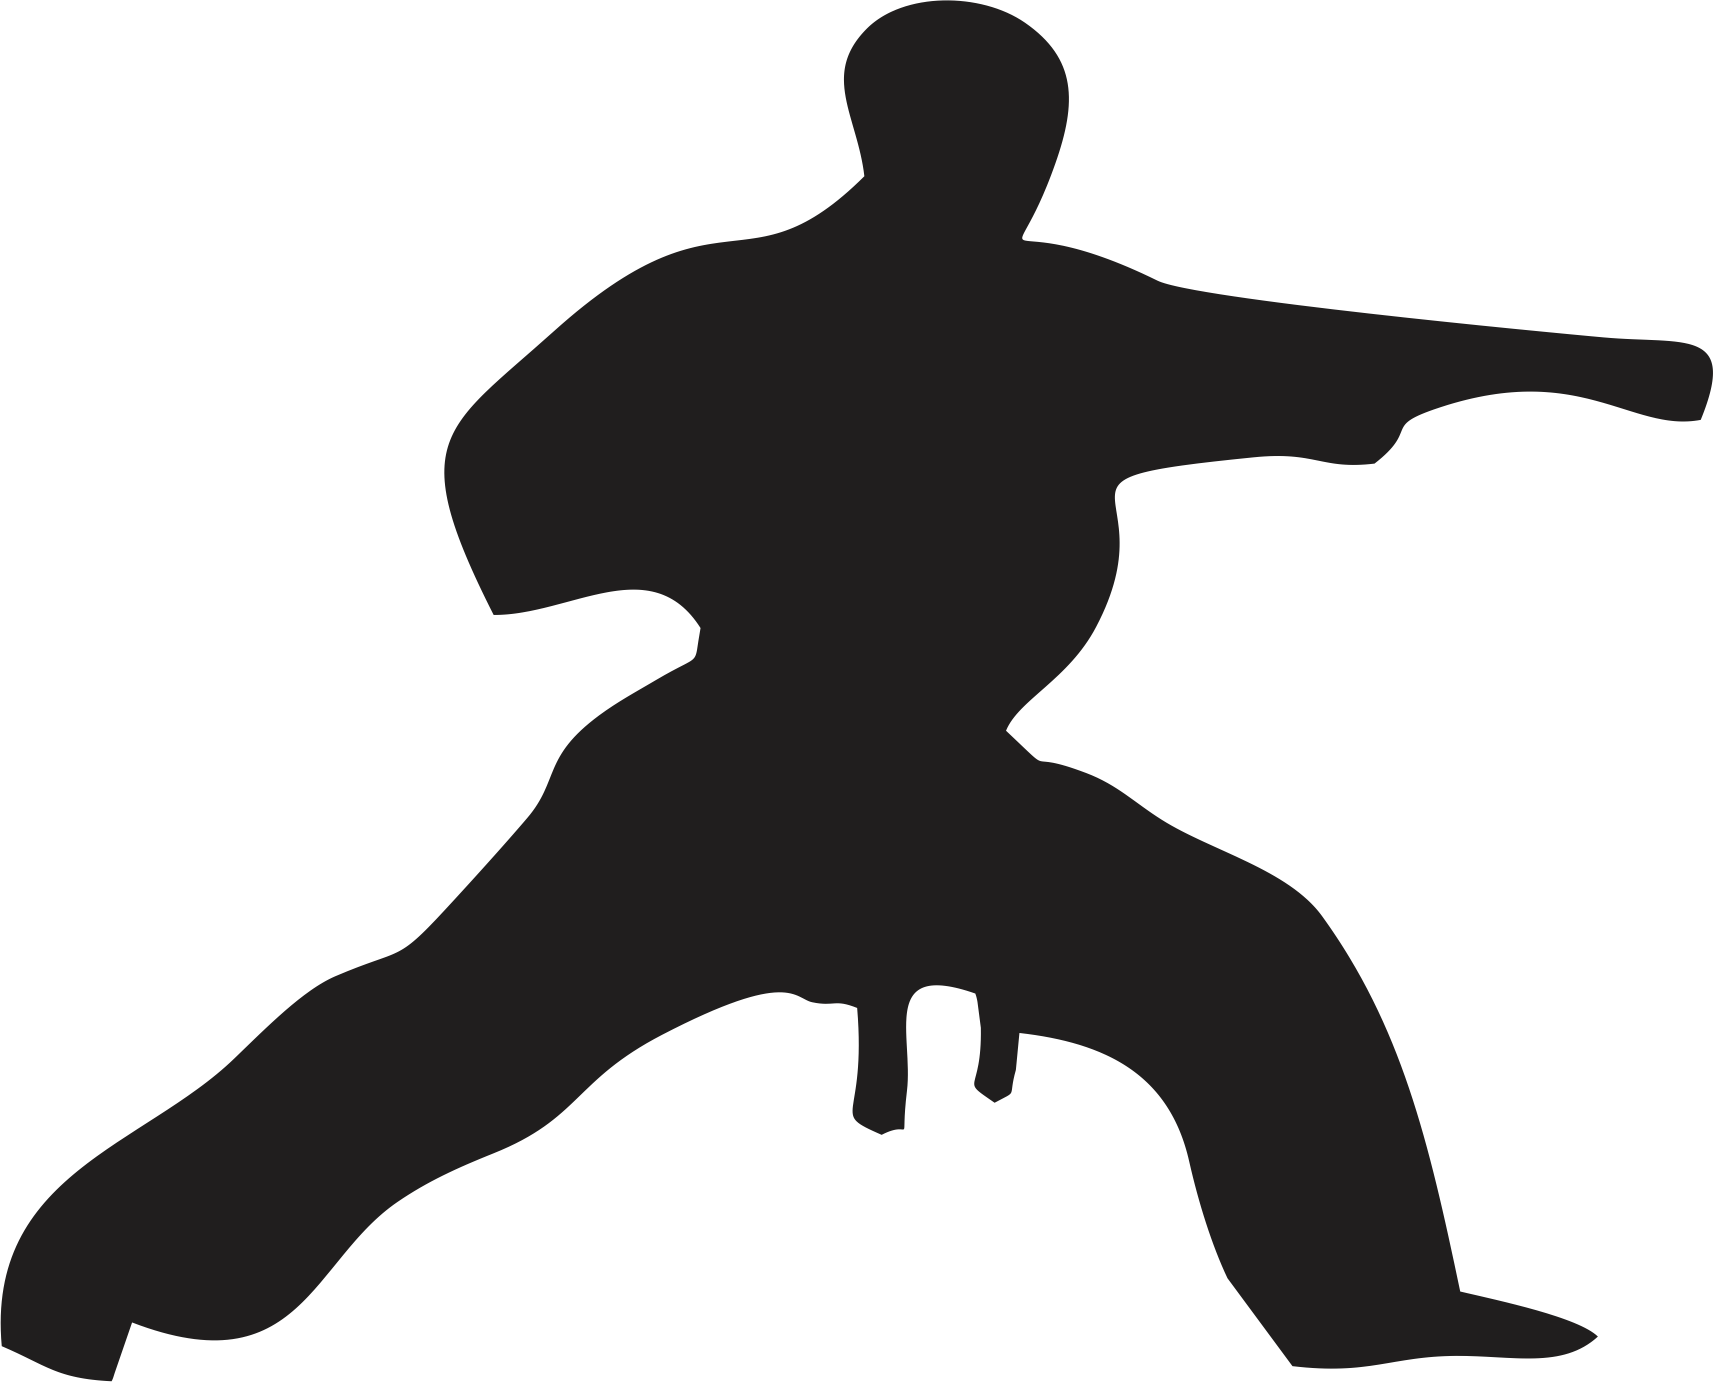 Karate Punch Silhouette (1713x1382)